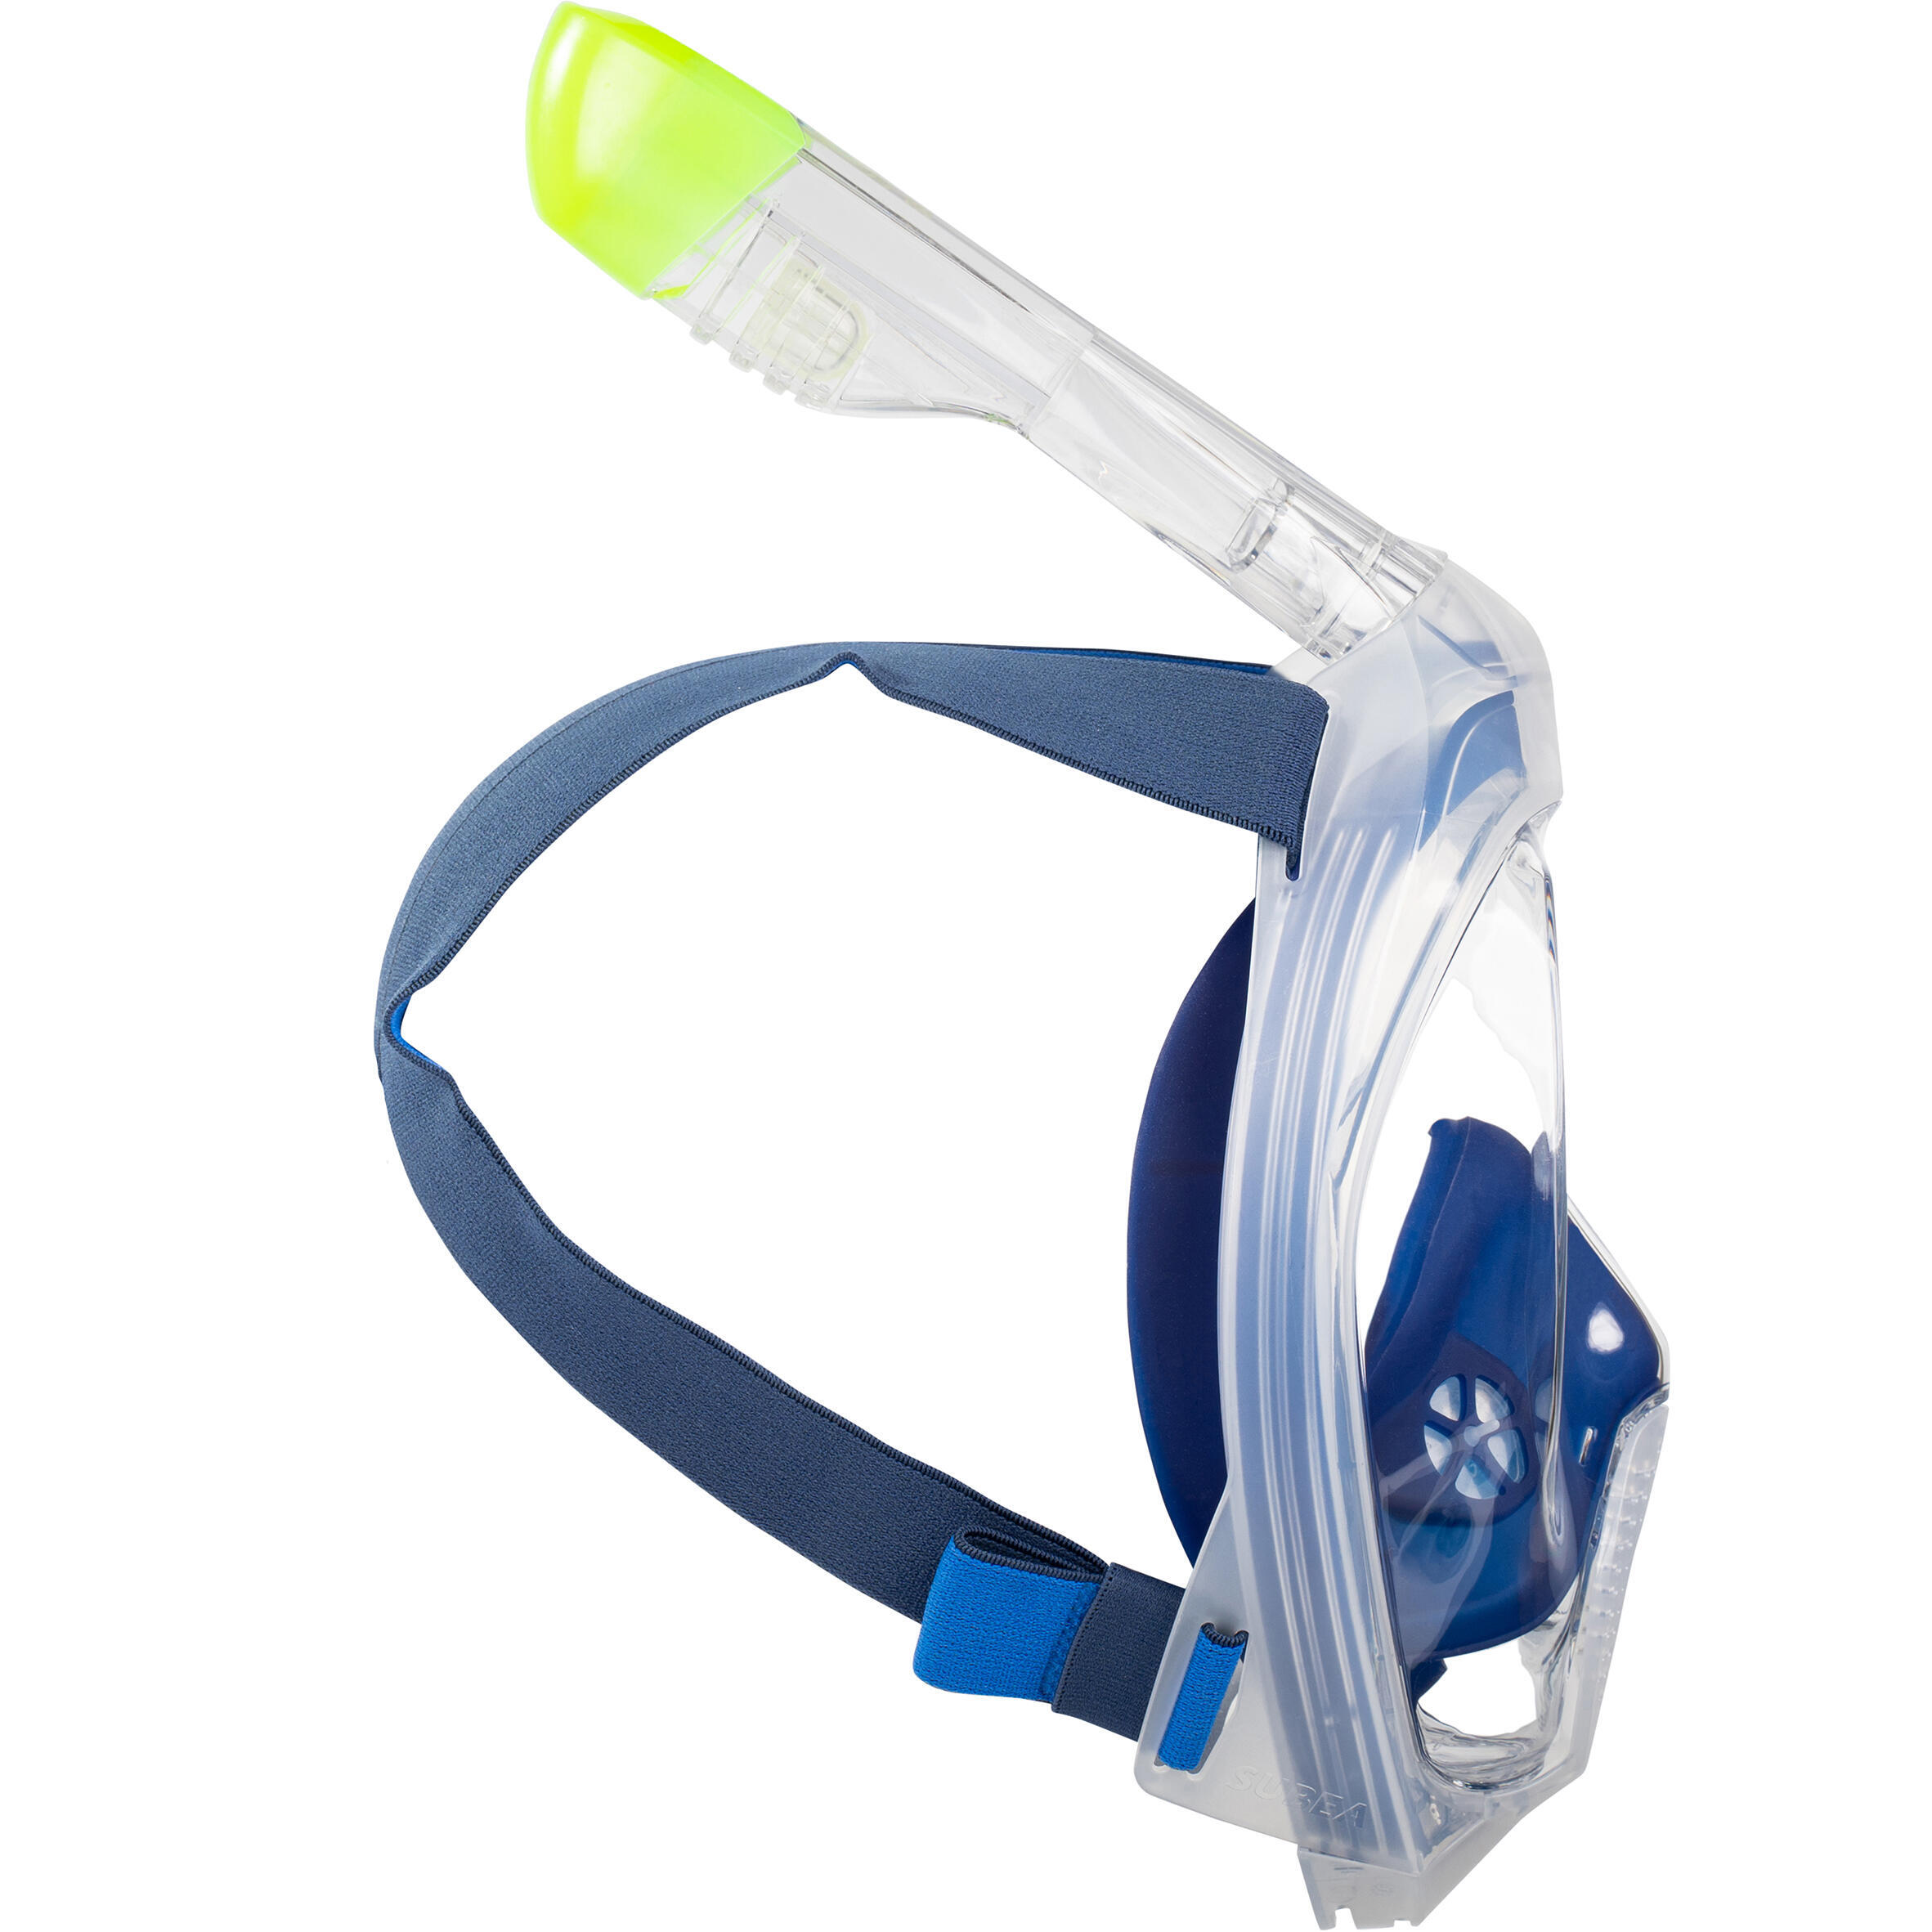 Adult’s Easybreath surface mask with an acoustic valve - 540 freetalk blue 3/8